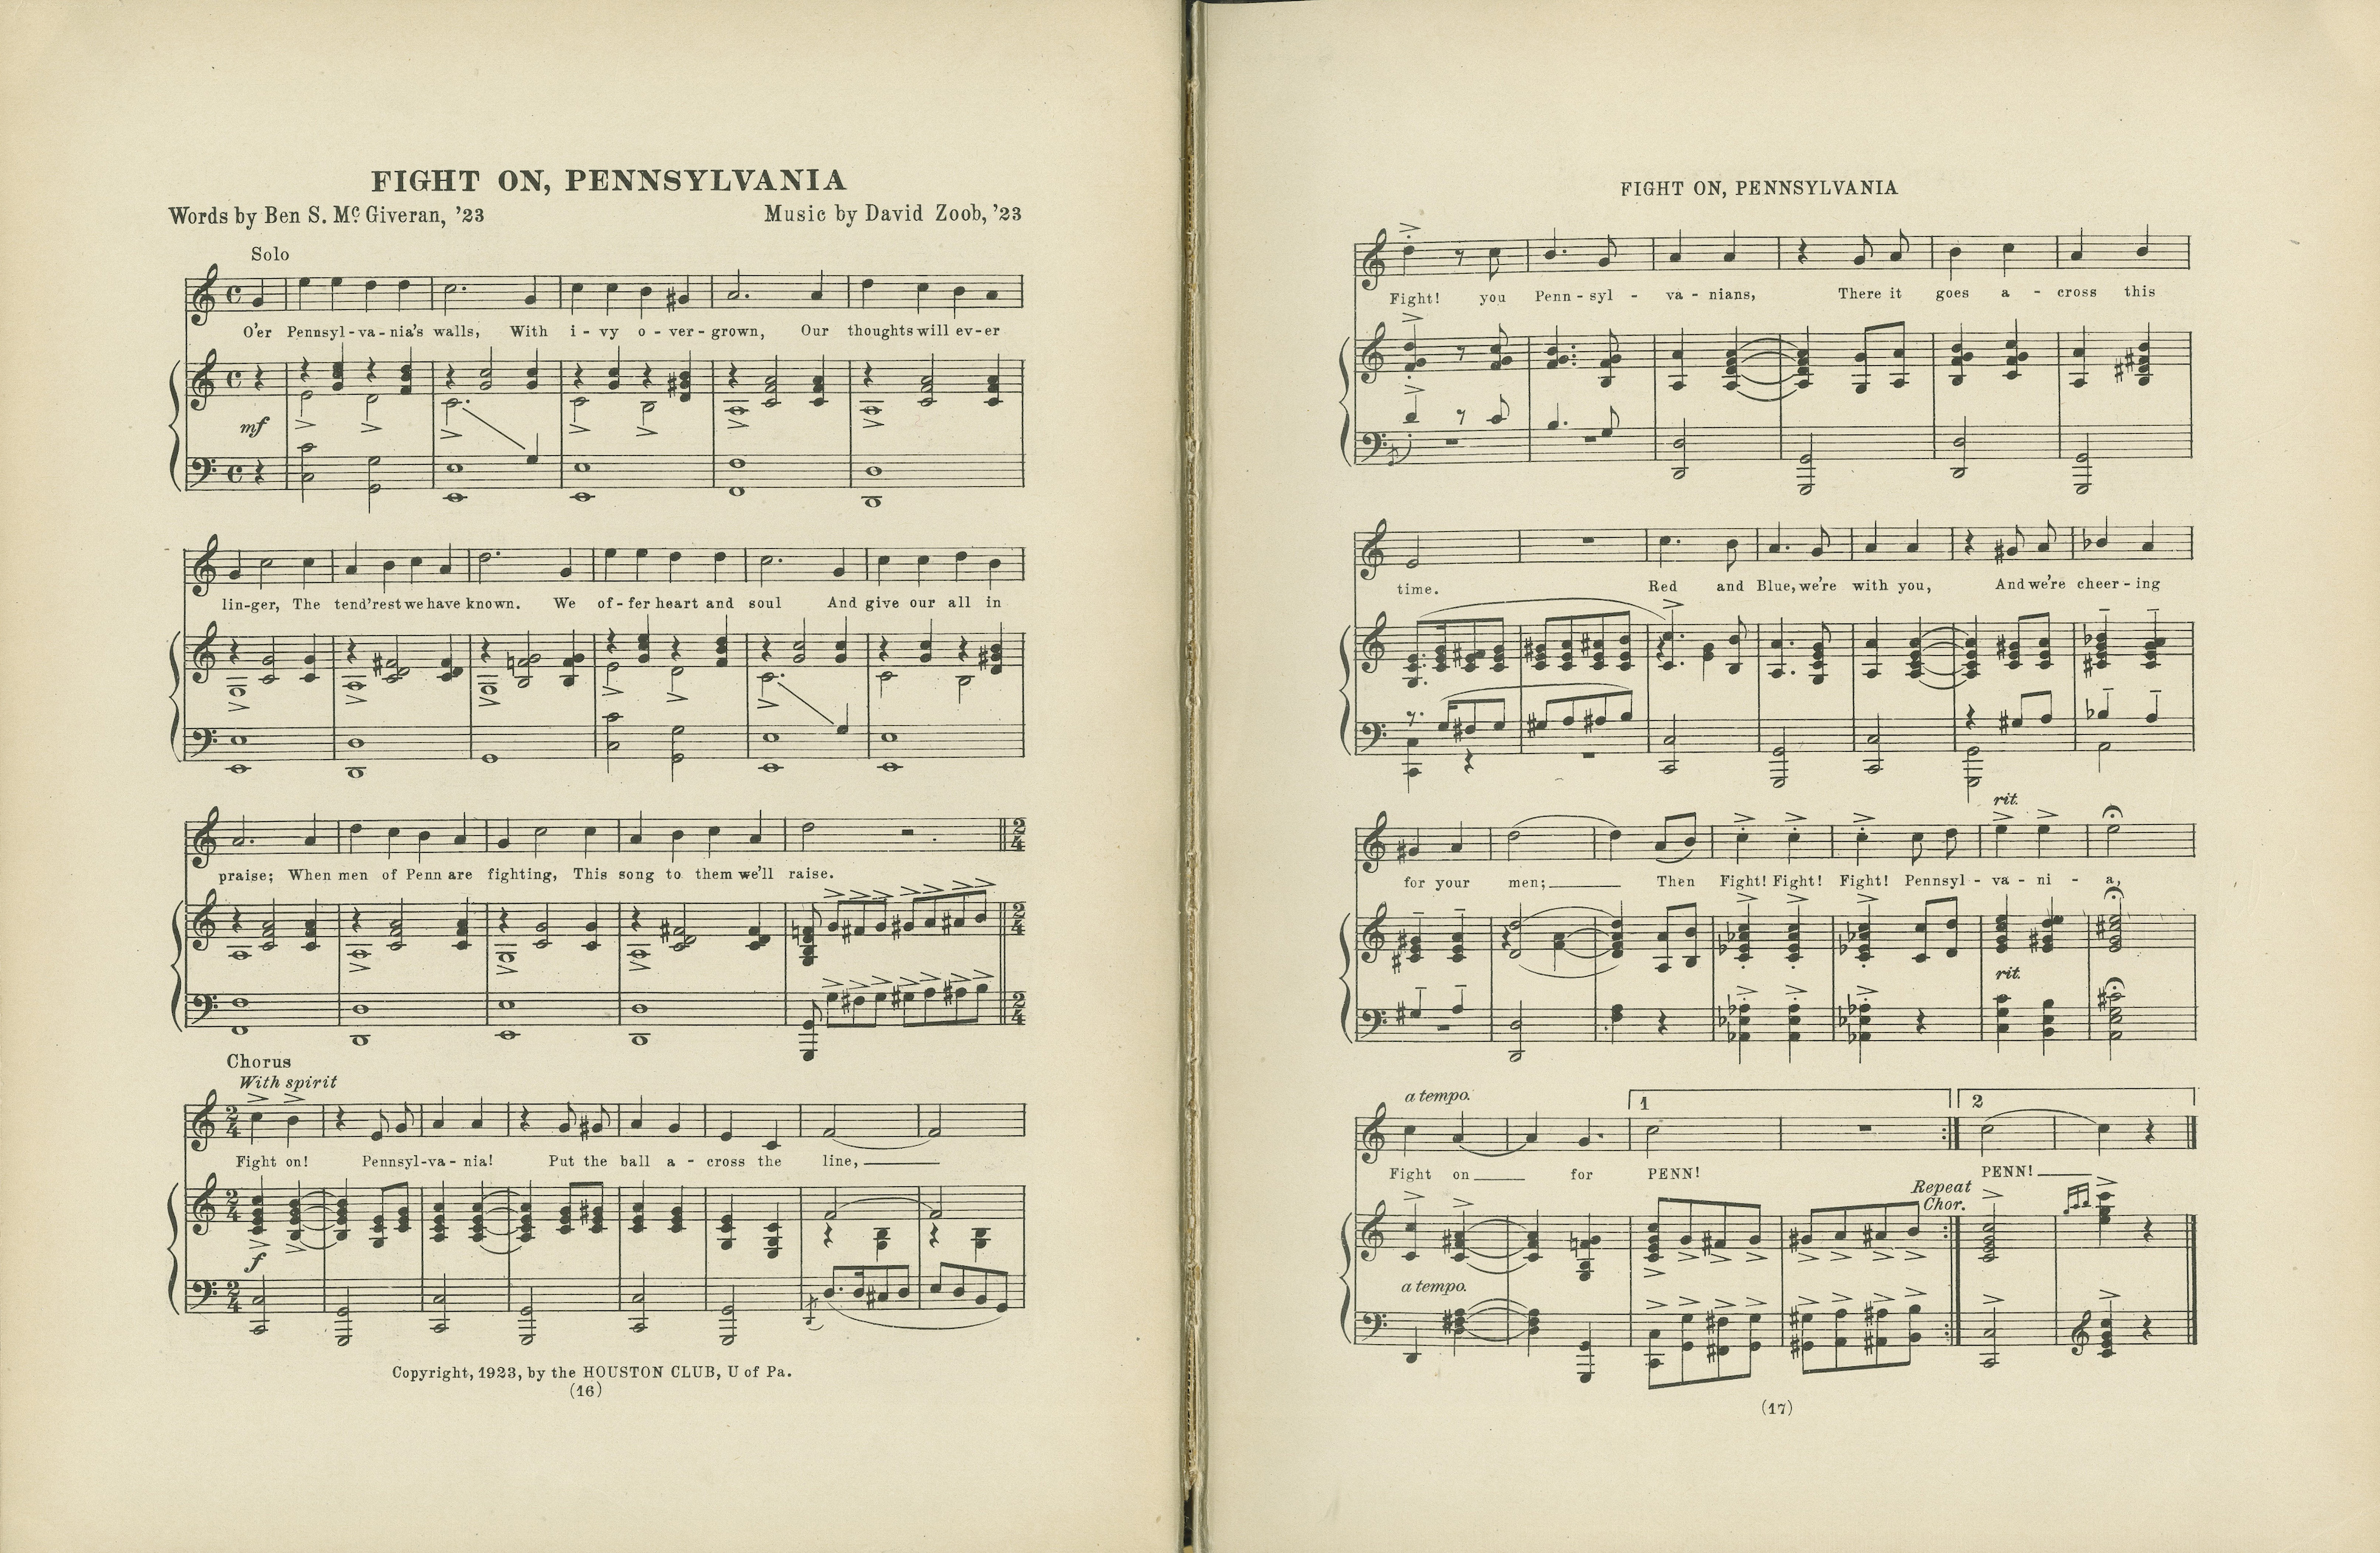 Two pages of sheet music for the song Fight On Pennsylvania.